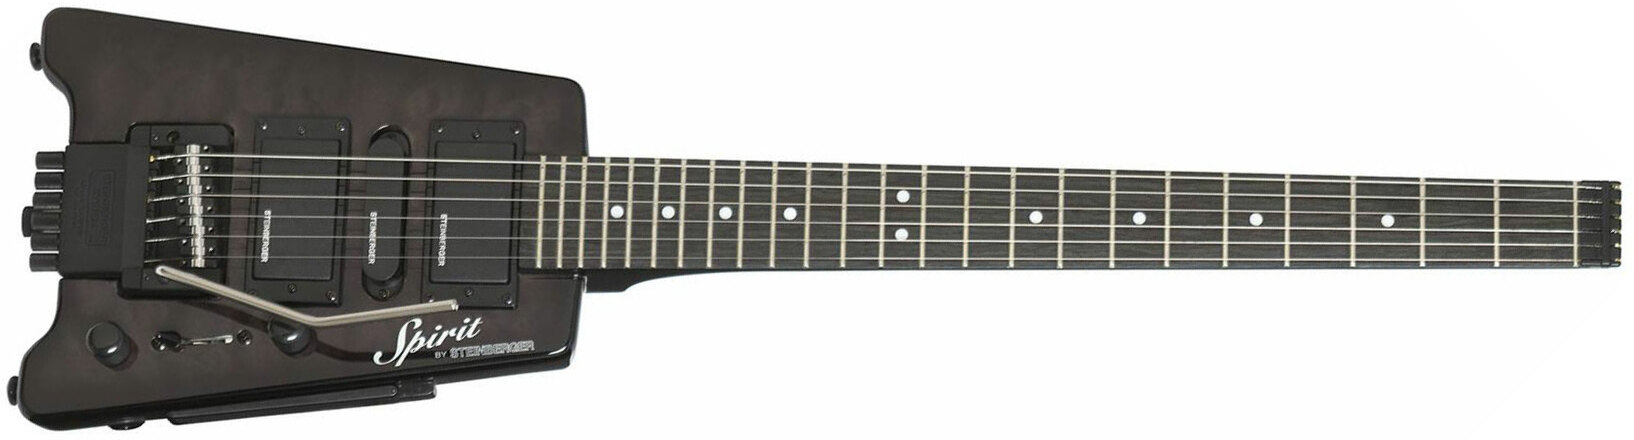 Steinberger Gt-pro Deluxe Quilt Top Outfit Hsh Trem Rw +housse - Trans Black - Travel & mini electric guitar - Main picture